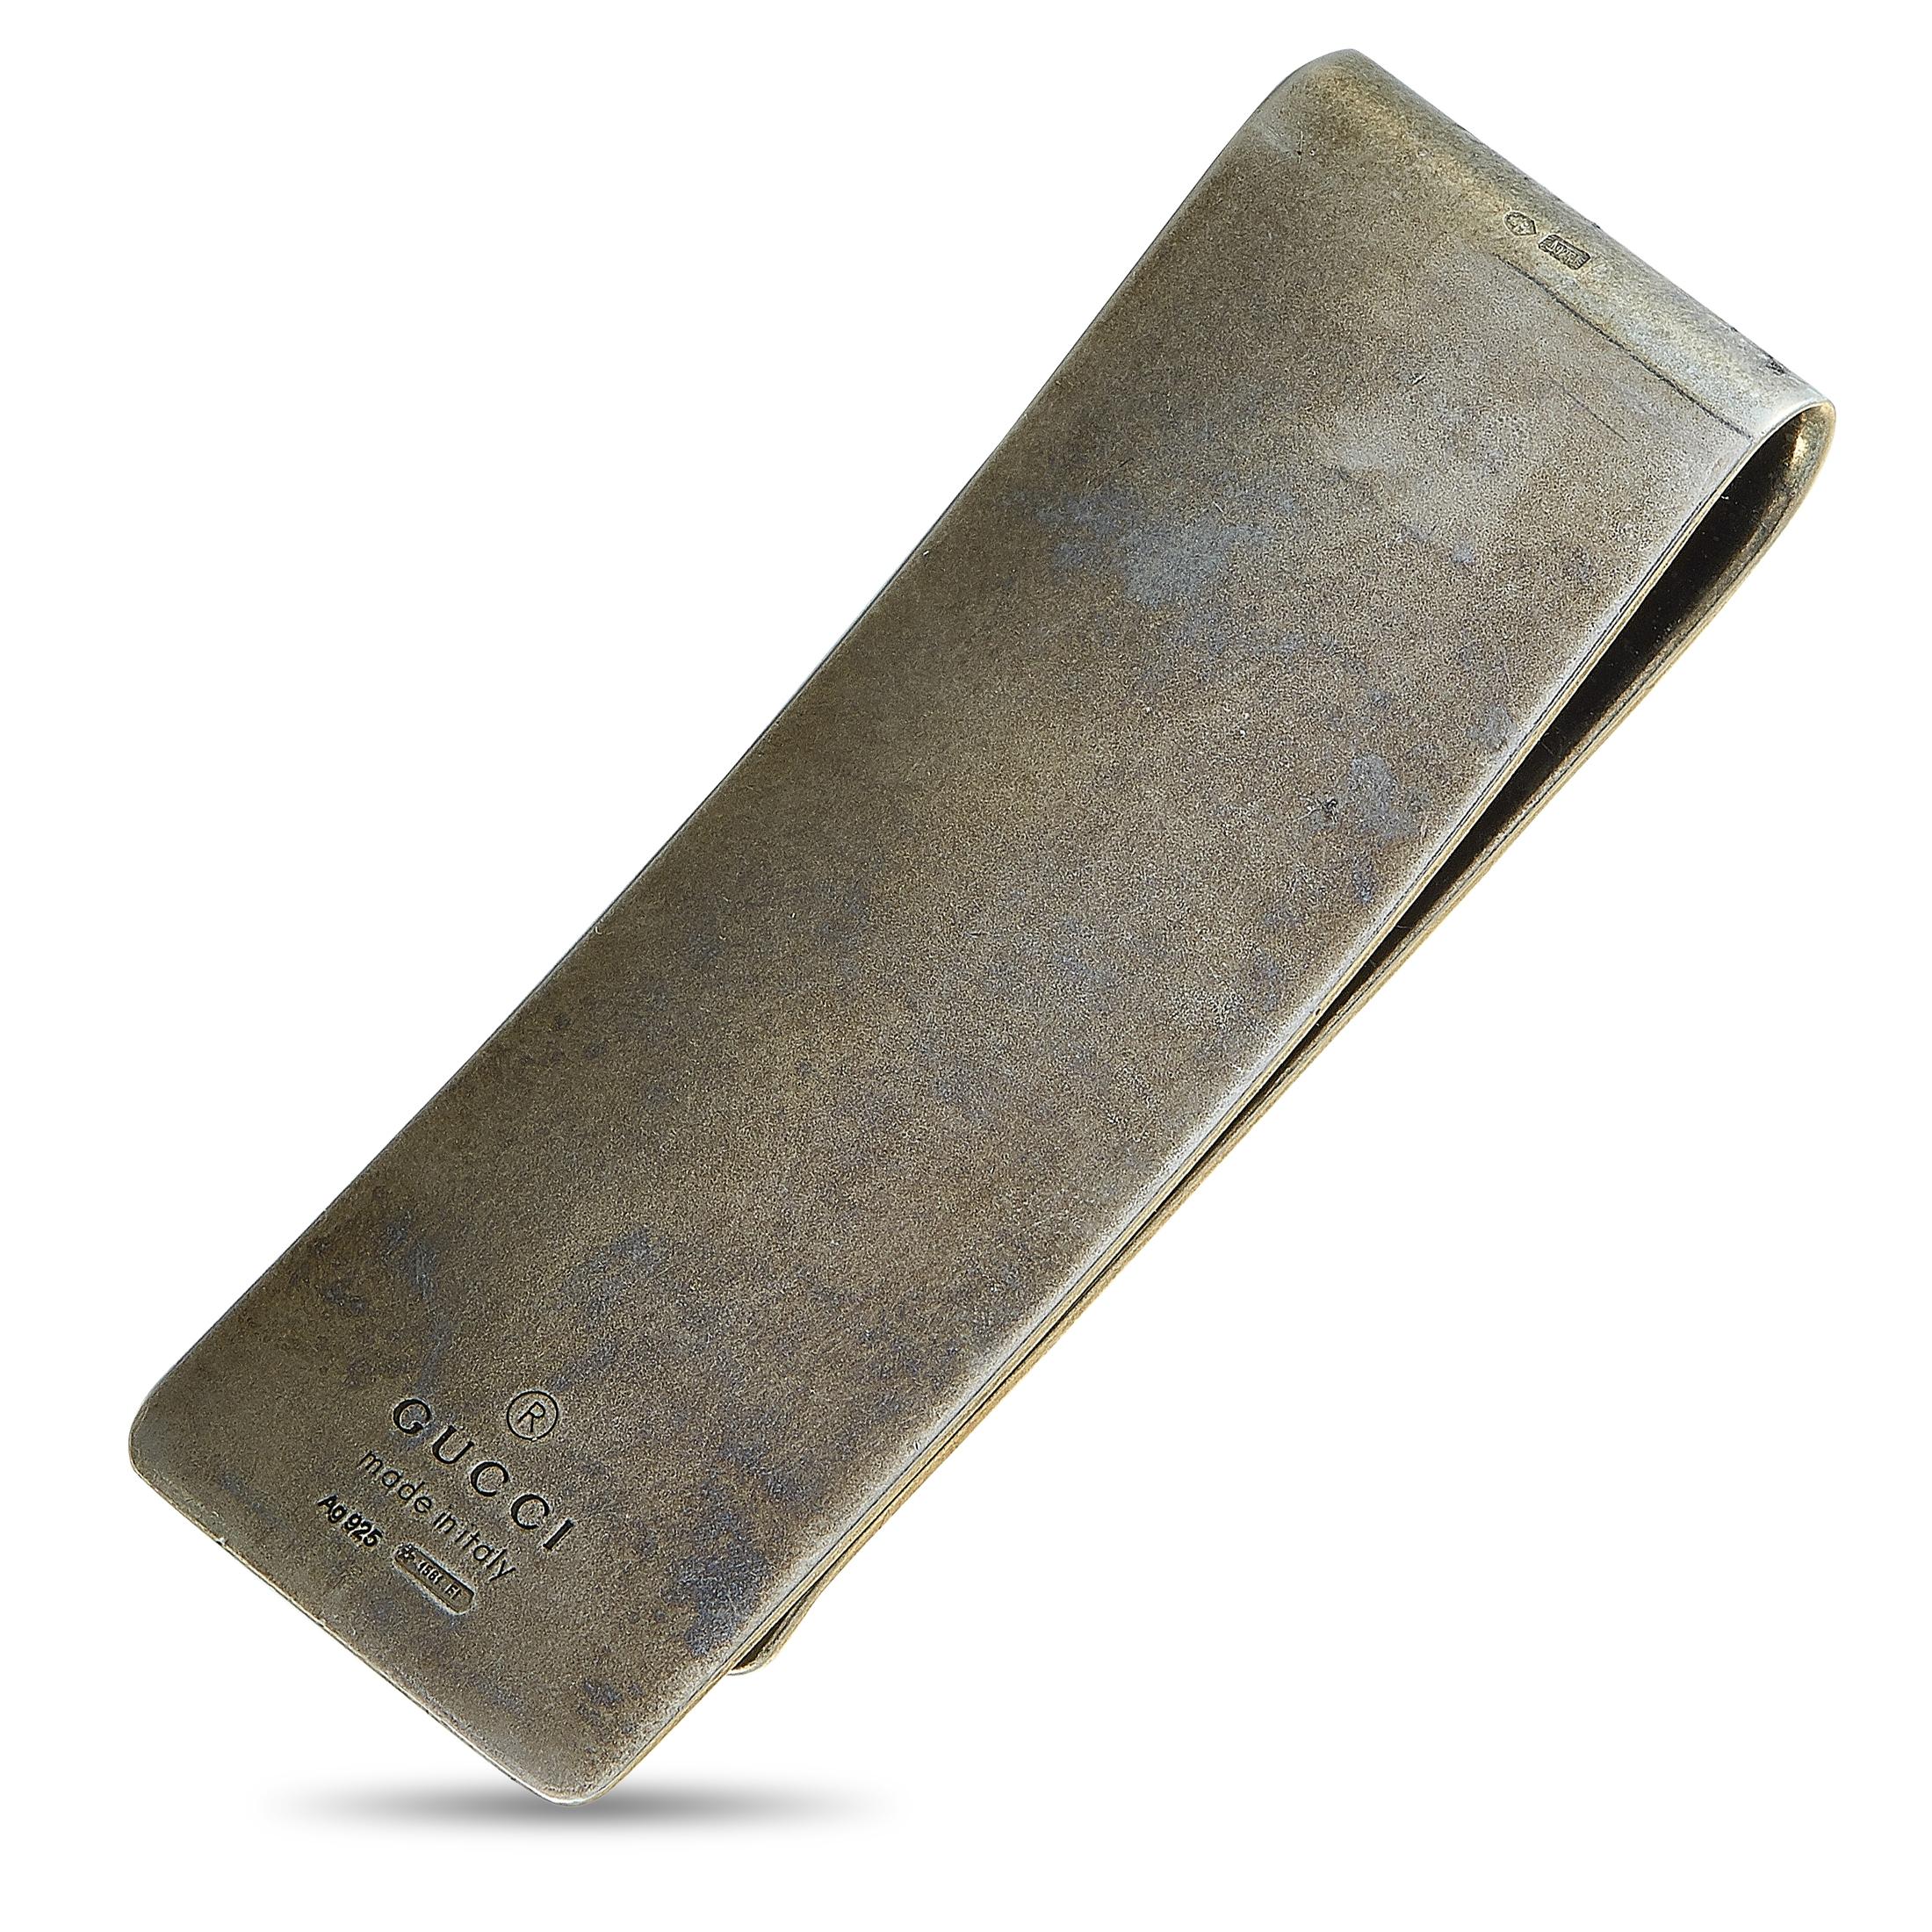 The Gucci “G Cube” money clip is made of aged sterling silver and weighs 23 grams, measuring 2.25” in length and 0.75” in width.
 
 This item is offered in brand new condition and includes the manufacturer’s box and papers.